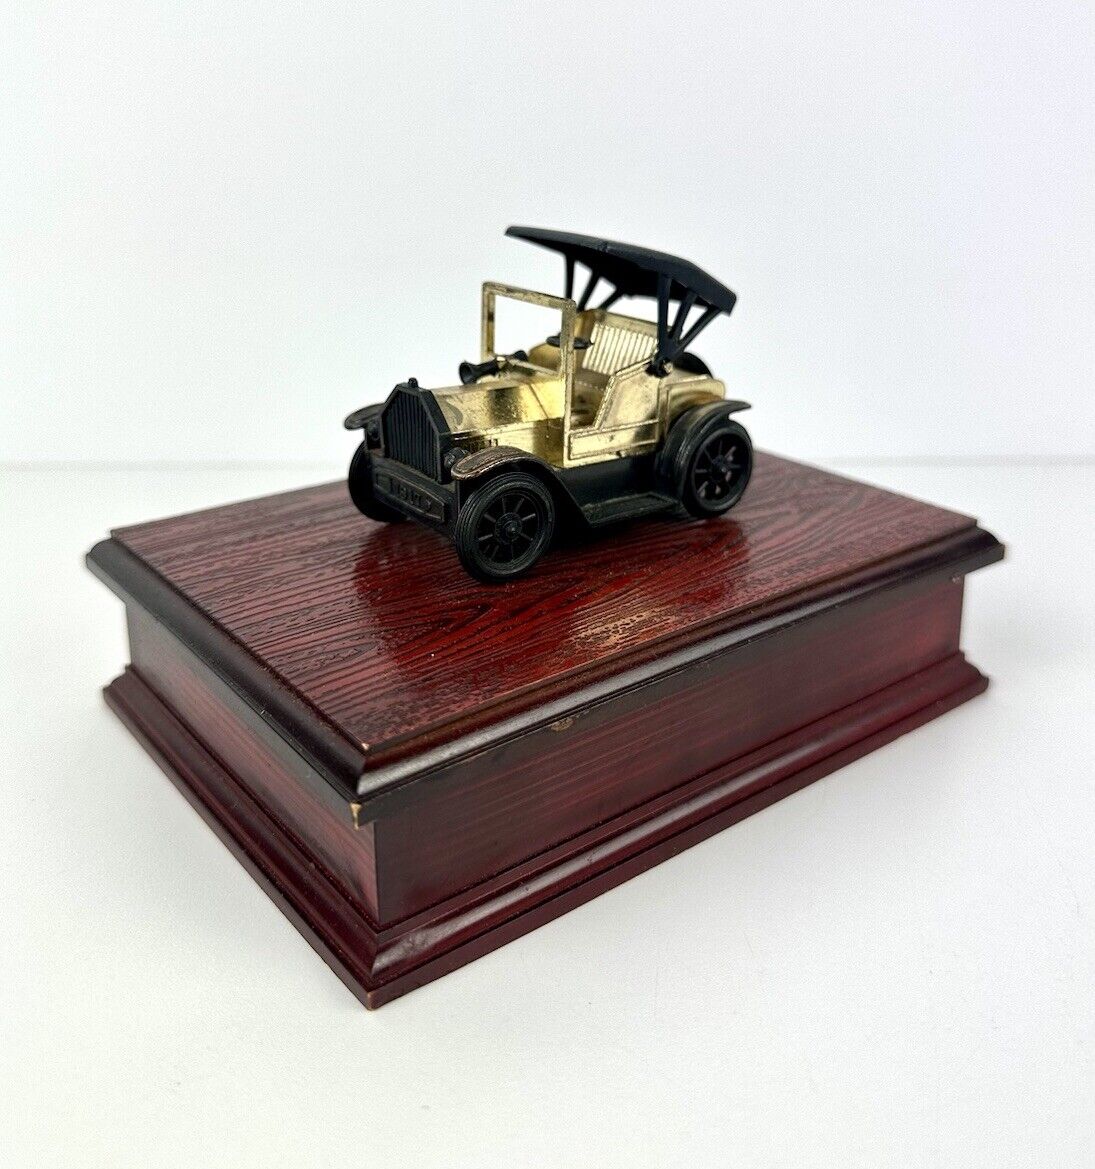 Sublime Vintage Playing Card Storage Box with Small Car 1917